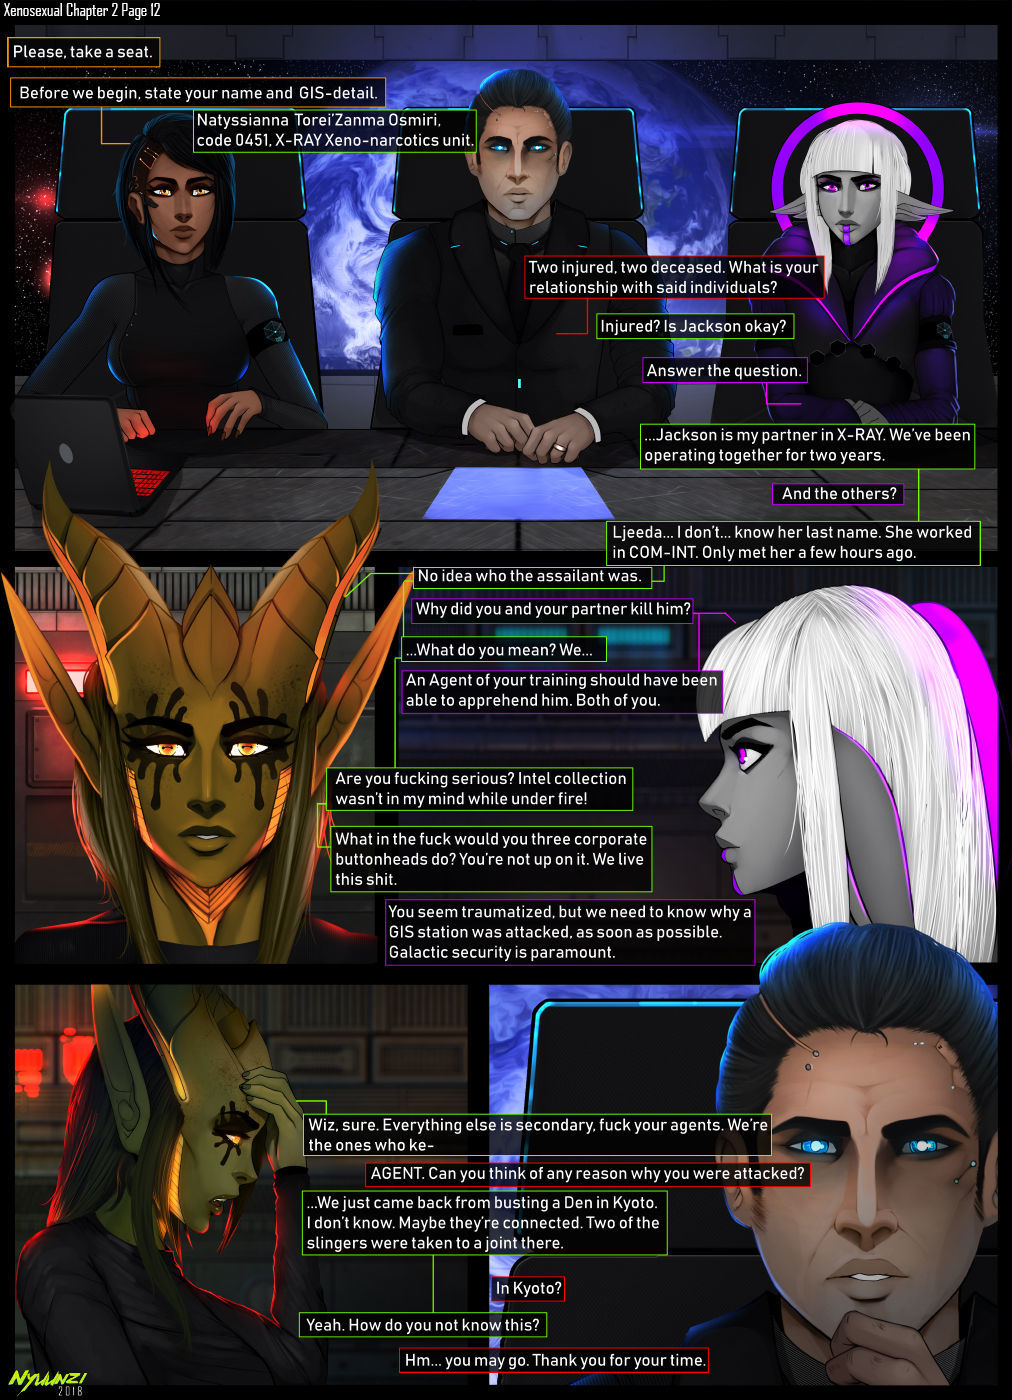 Xenosexual Mass Effect page 25